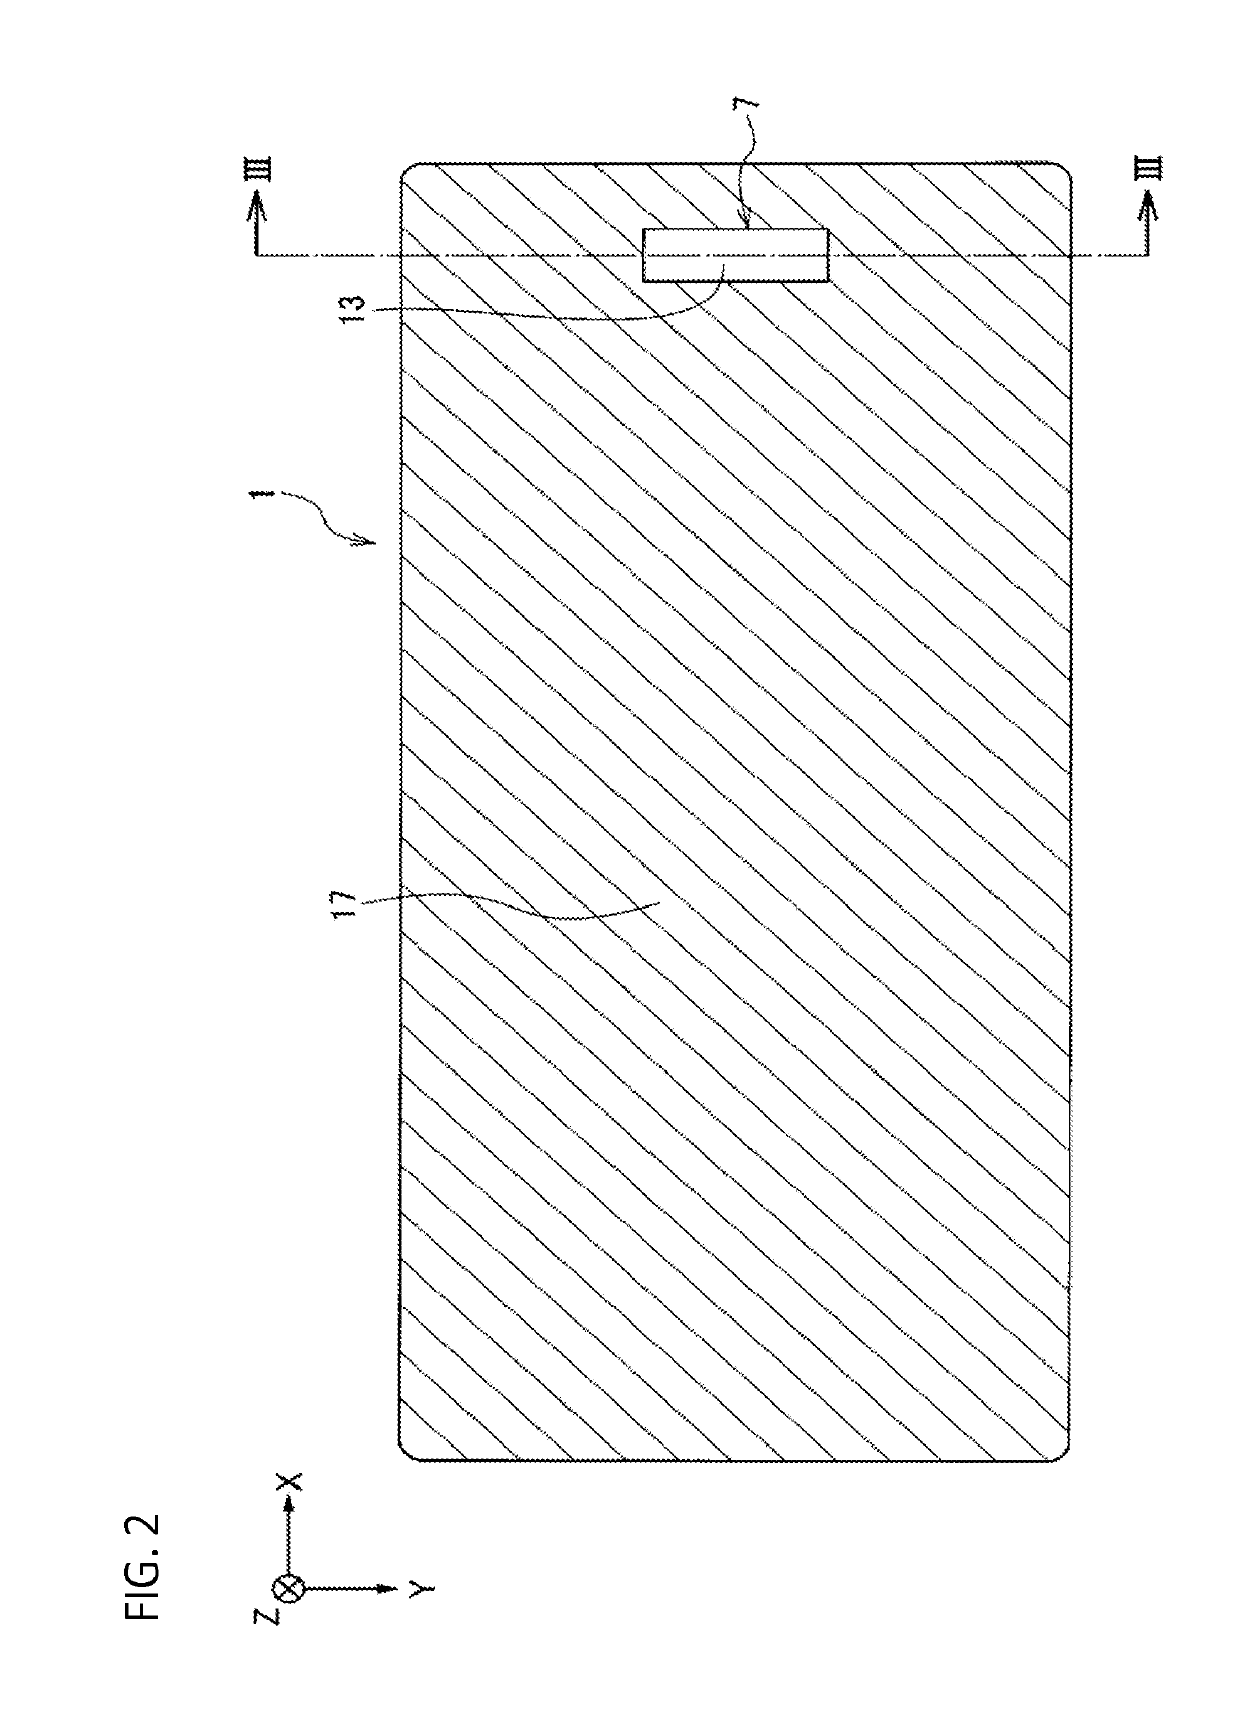 Glass substrate and method for manufacturing the same, cover glass and method for manufacturing the same, personal digital assistant, and display device